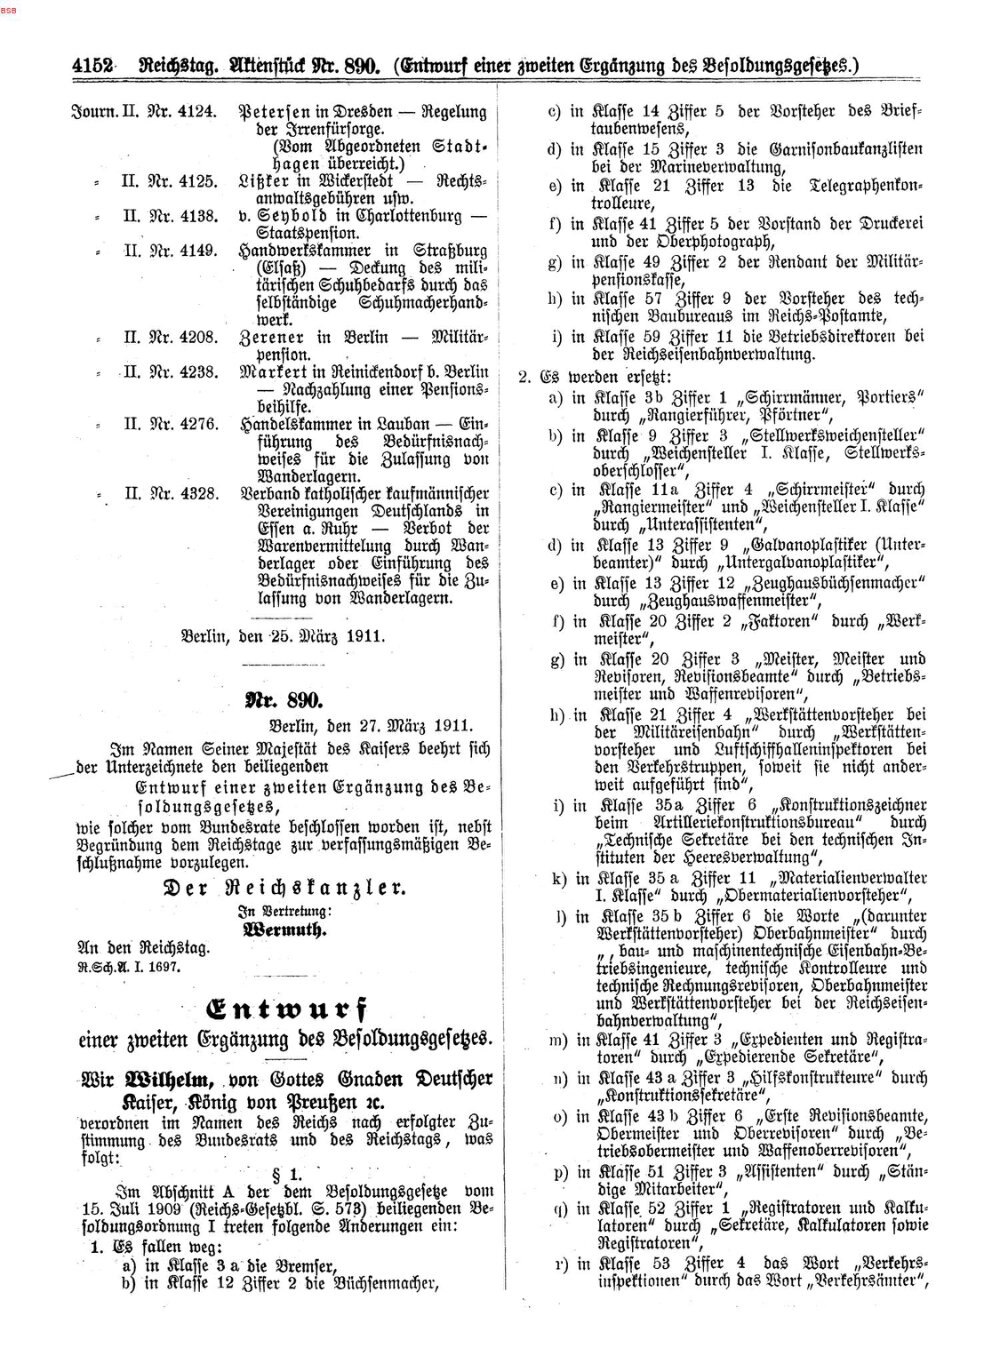 Scan of page 4152